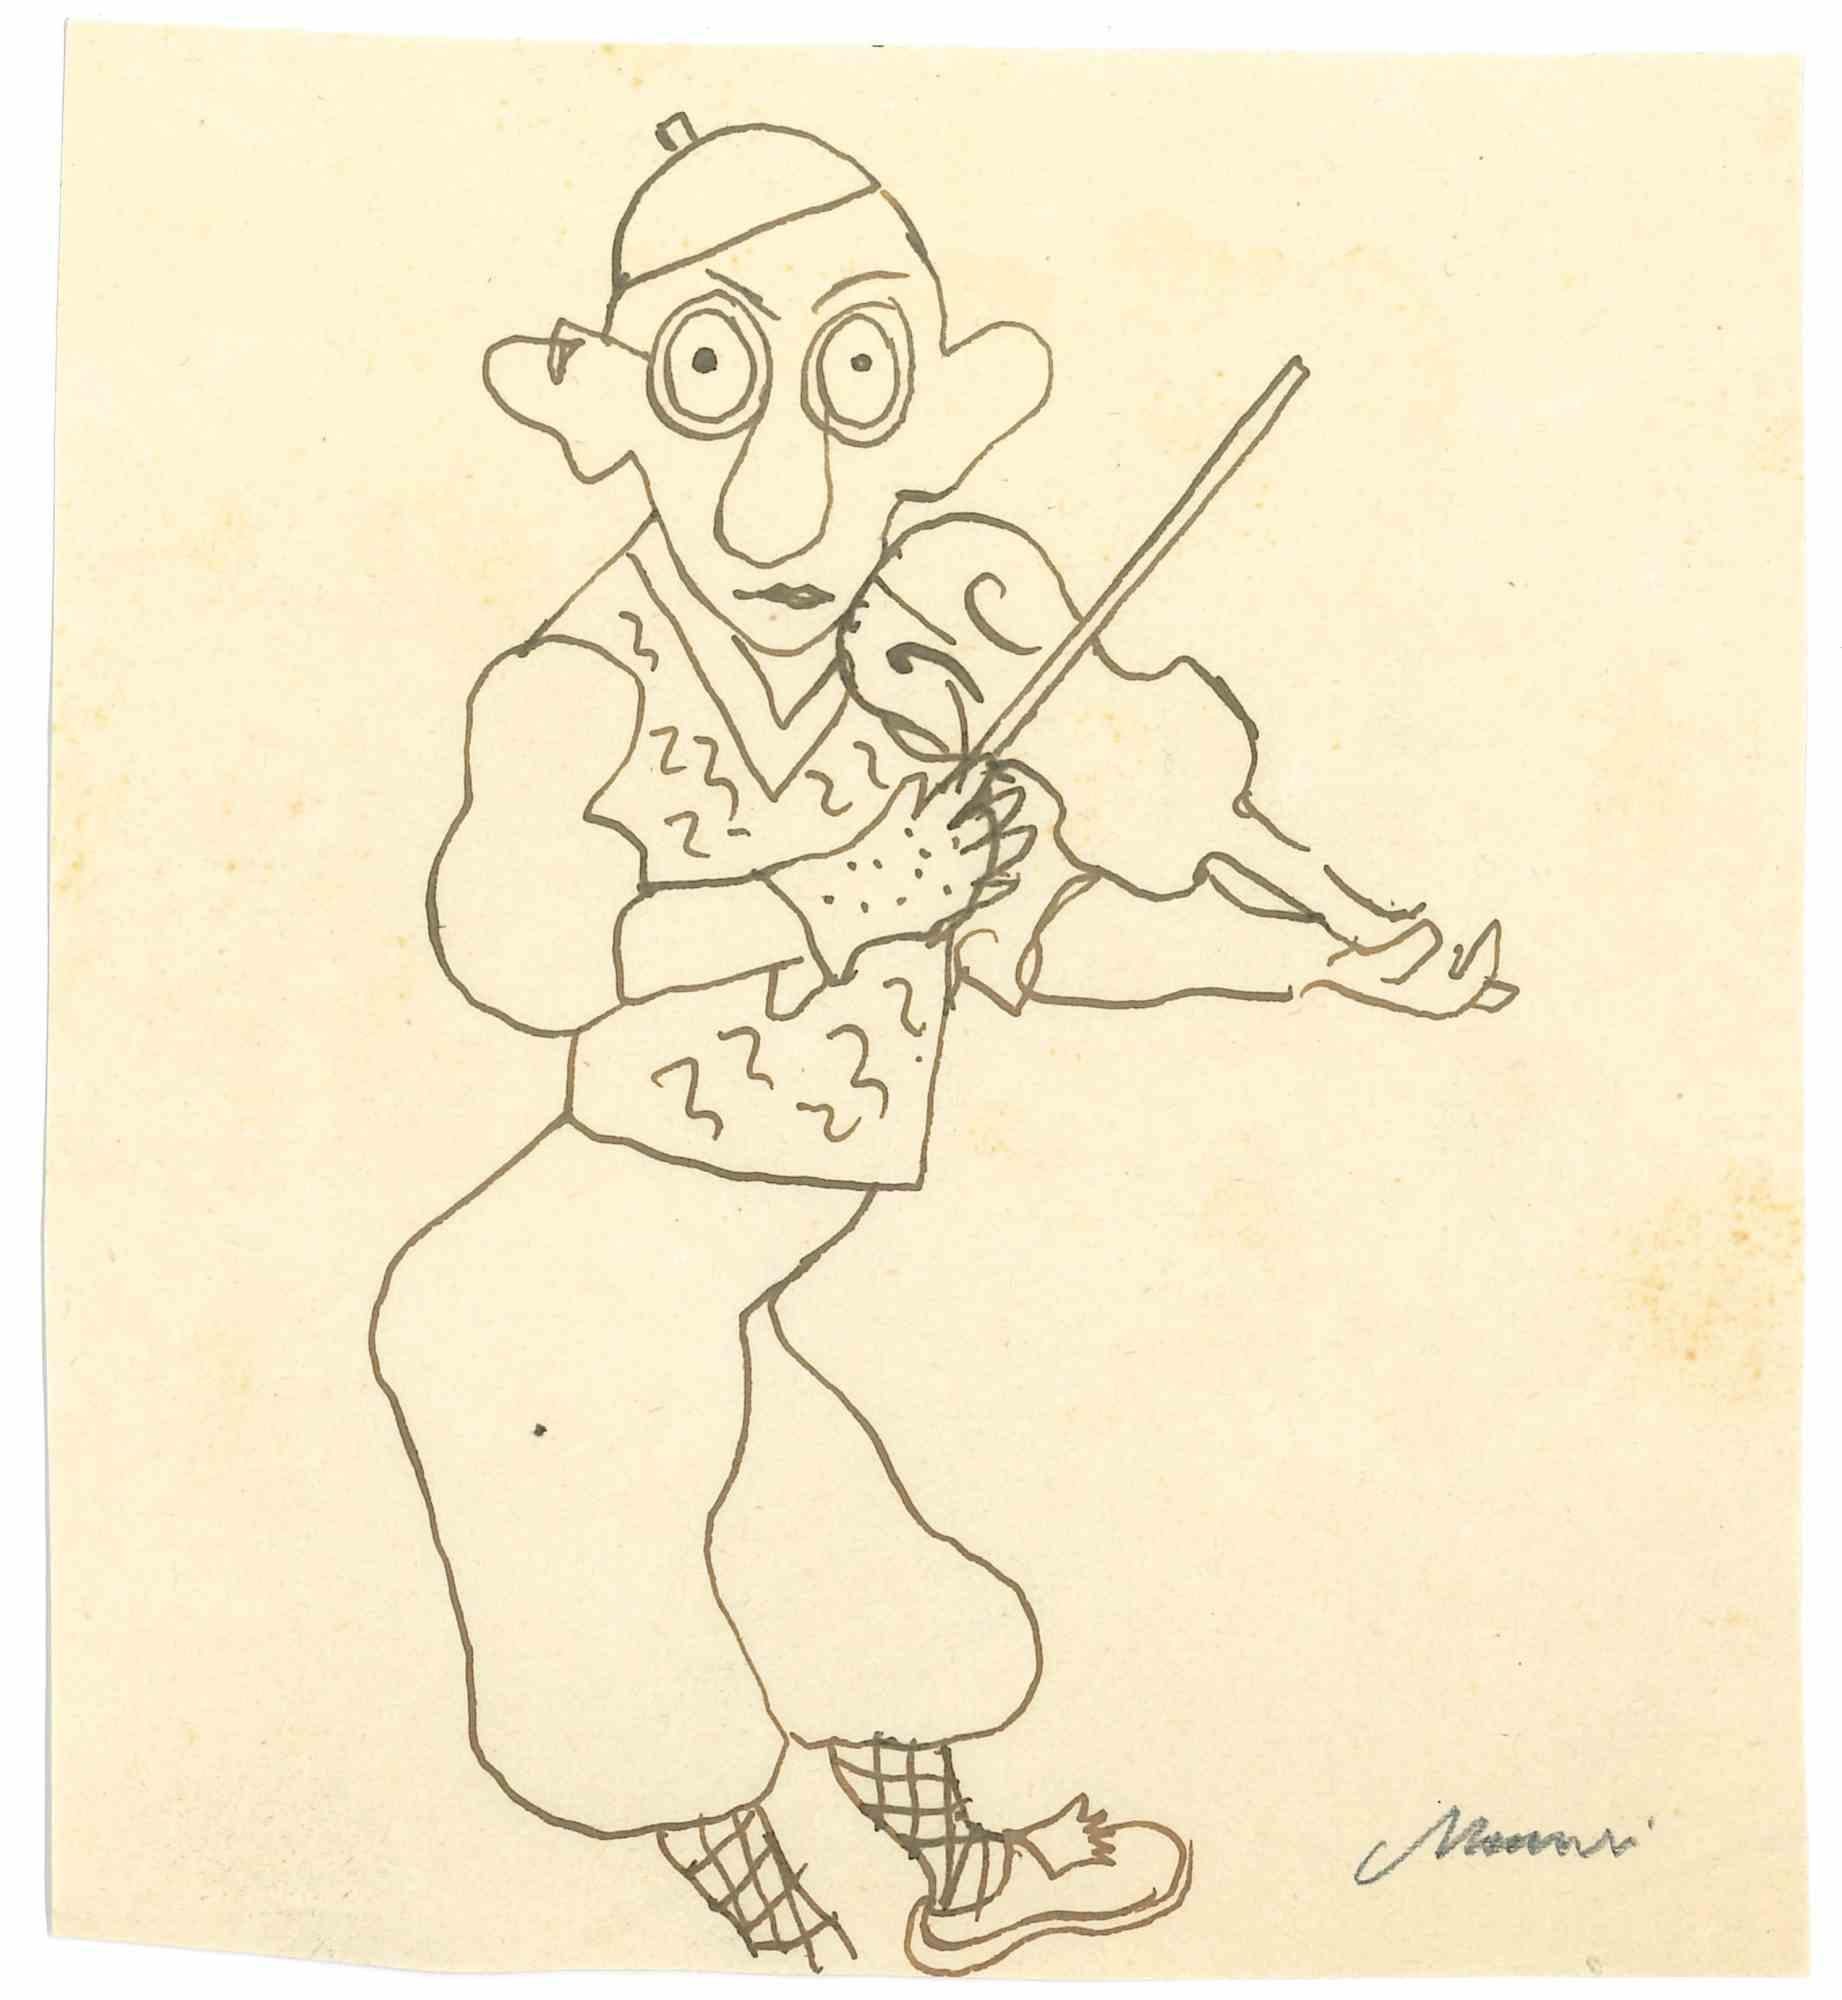 Violonist is a china ink drawing realized by Mino Maccari  (1924-1989) in the Mid-20th Century.

Hand-signed.

Good conditions with slight foxing.

Mino Maccari (Siena, 1924-Rome, June 16, 1989) was an Italian writer, painter, engraver and